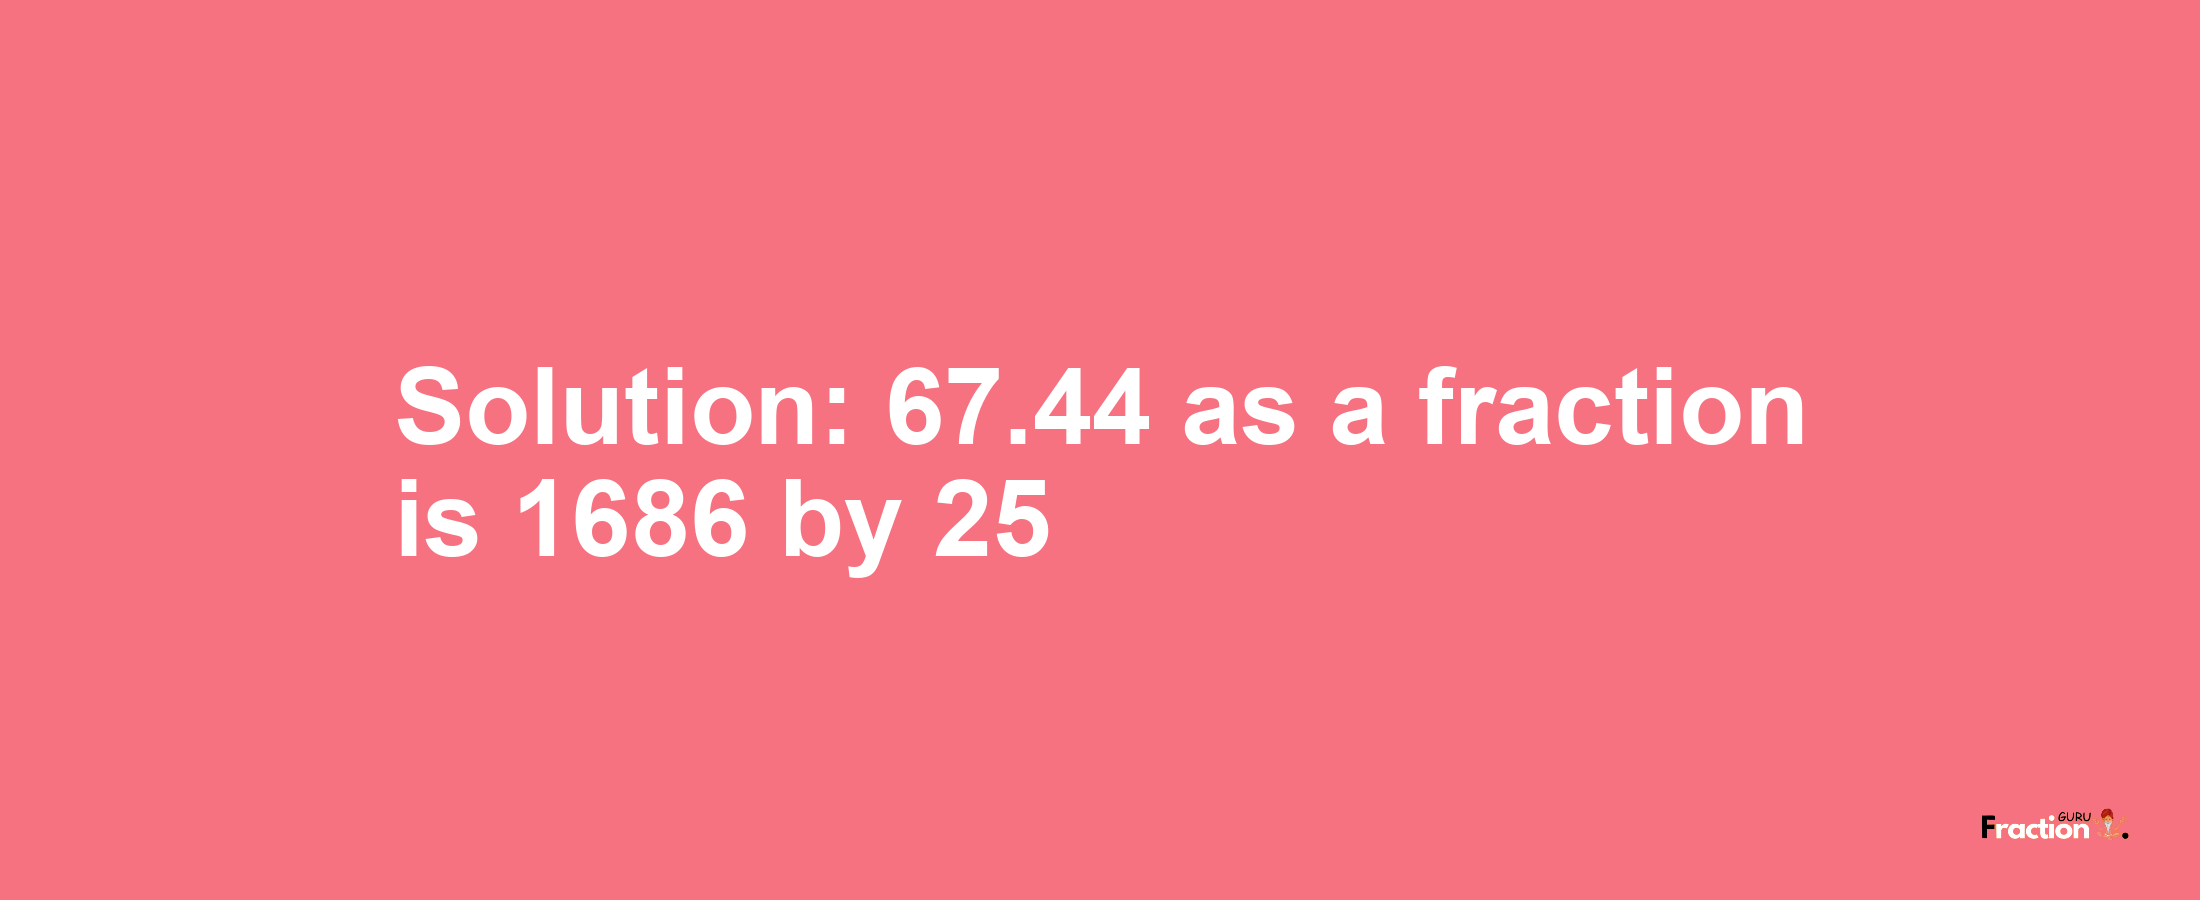 Solution:67.44 as a fraction is 1686/25